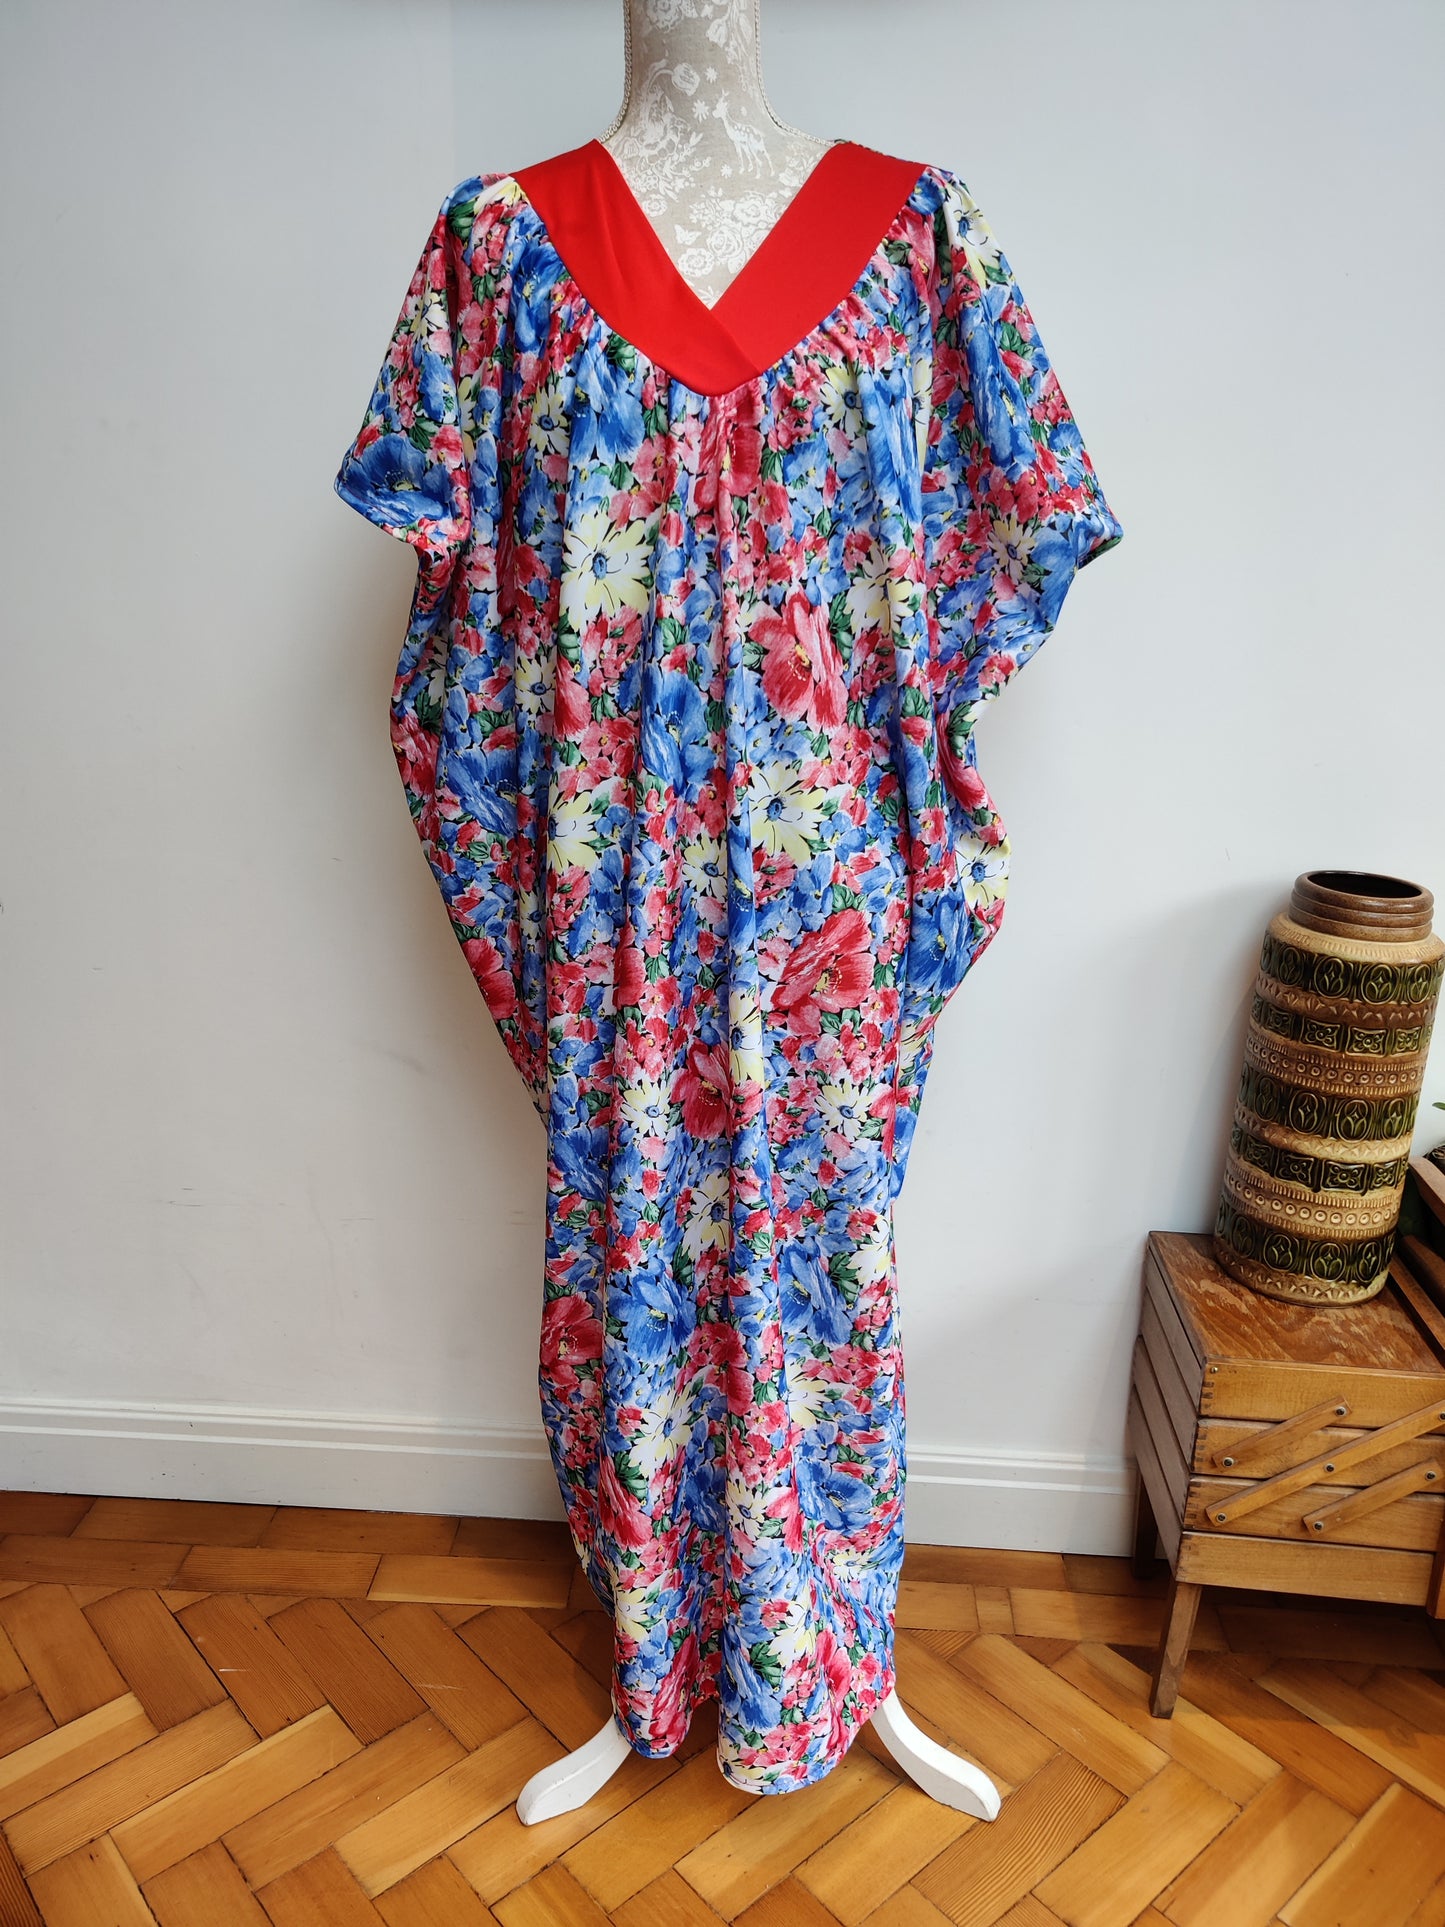 Plus size v neck kaftan in red and blue floral print.